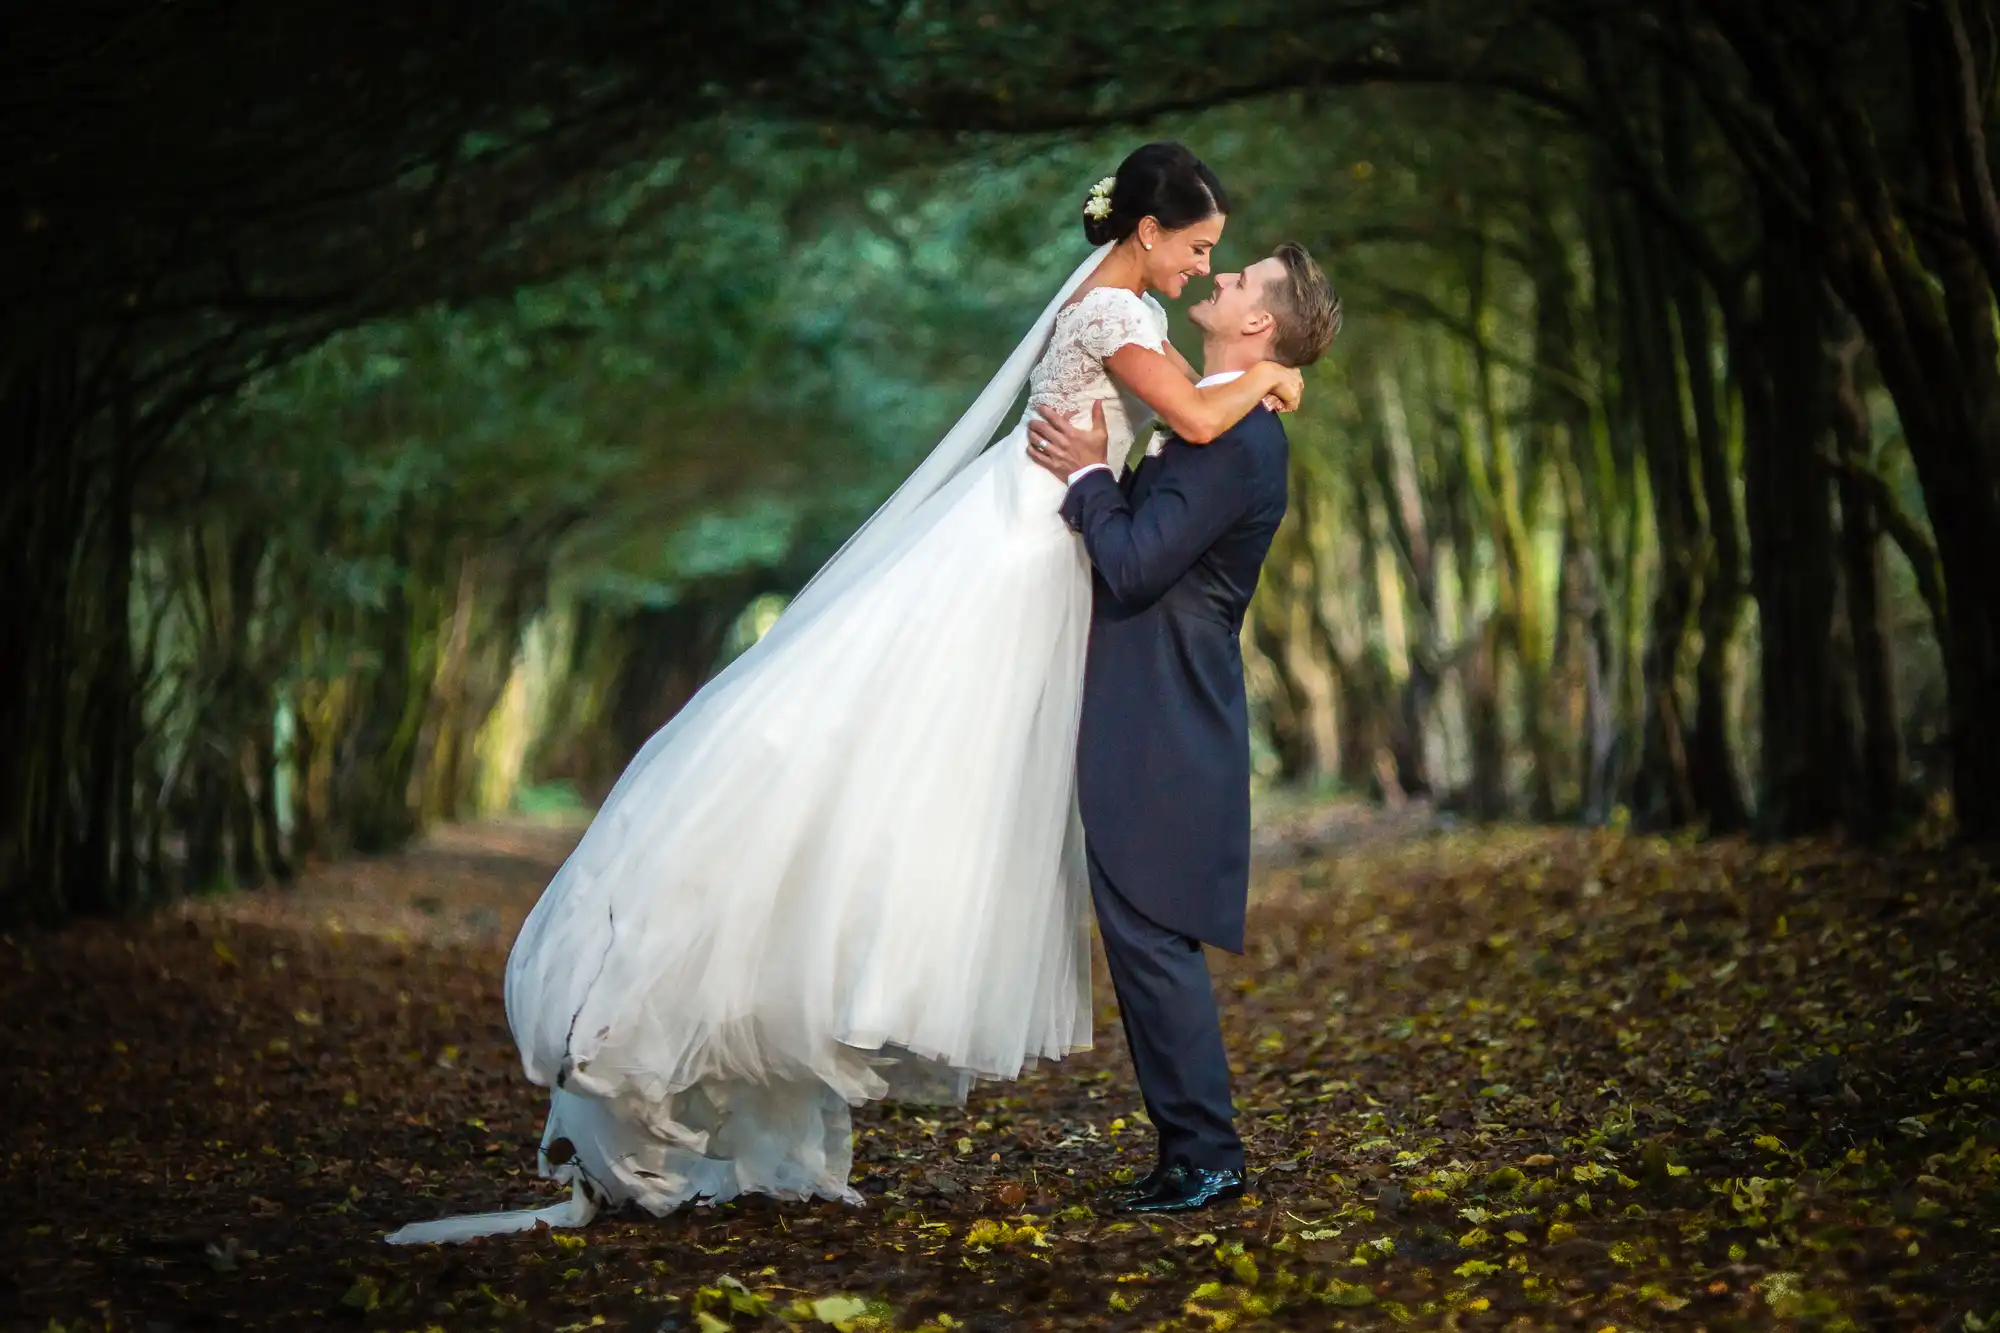 Groom lifting bride in a forested path, kissing under a canopy of trees with autumn leaves on the ground.